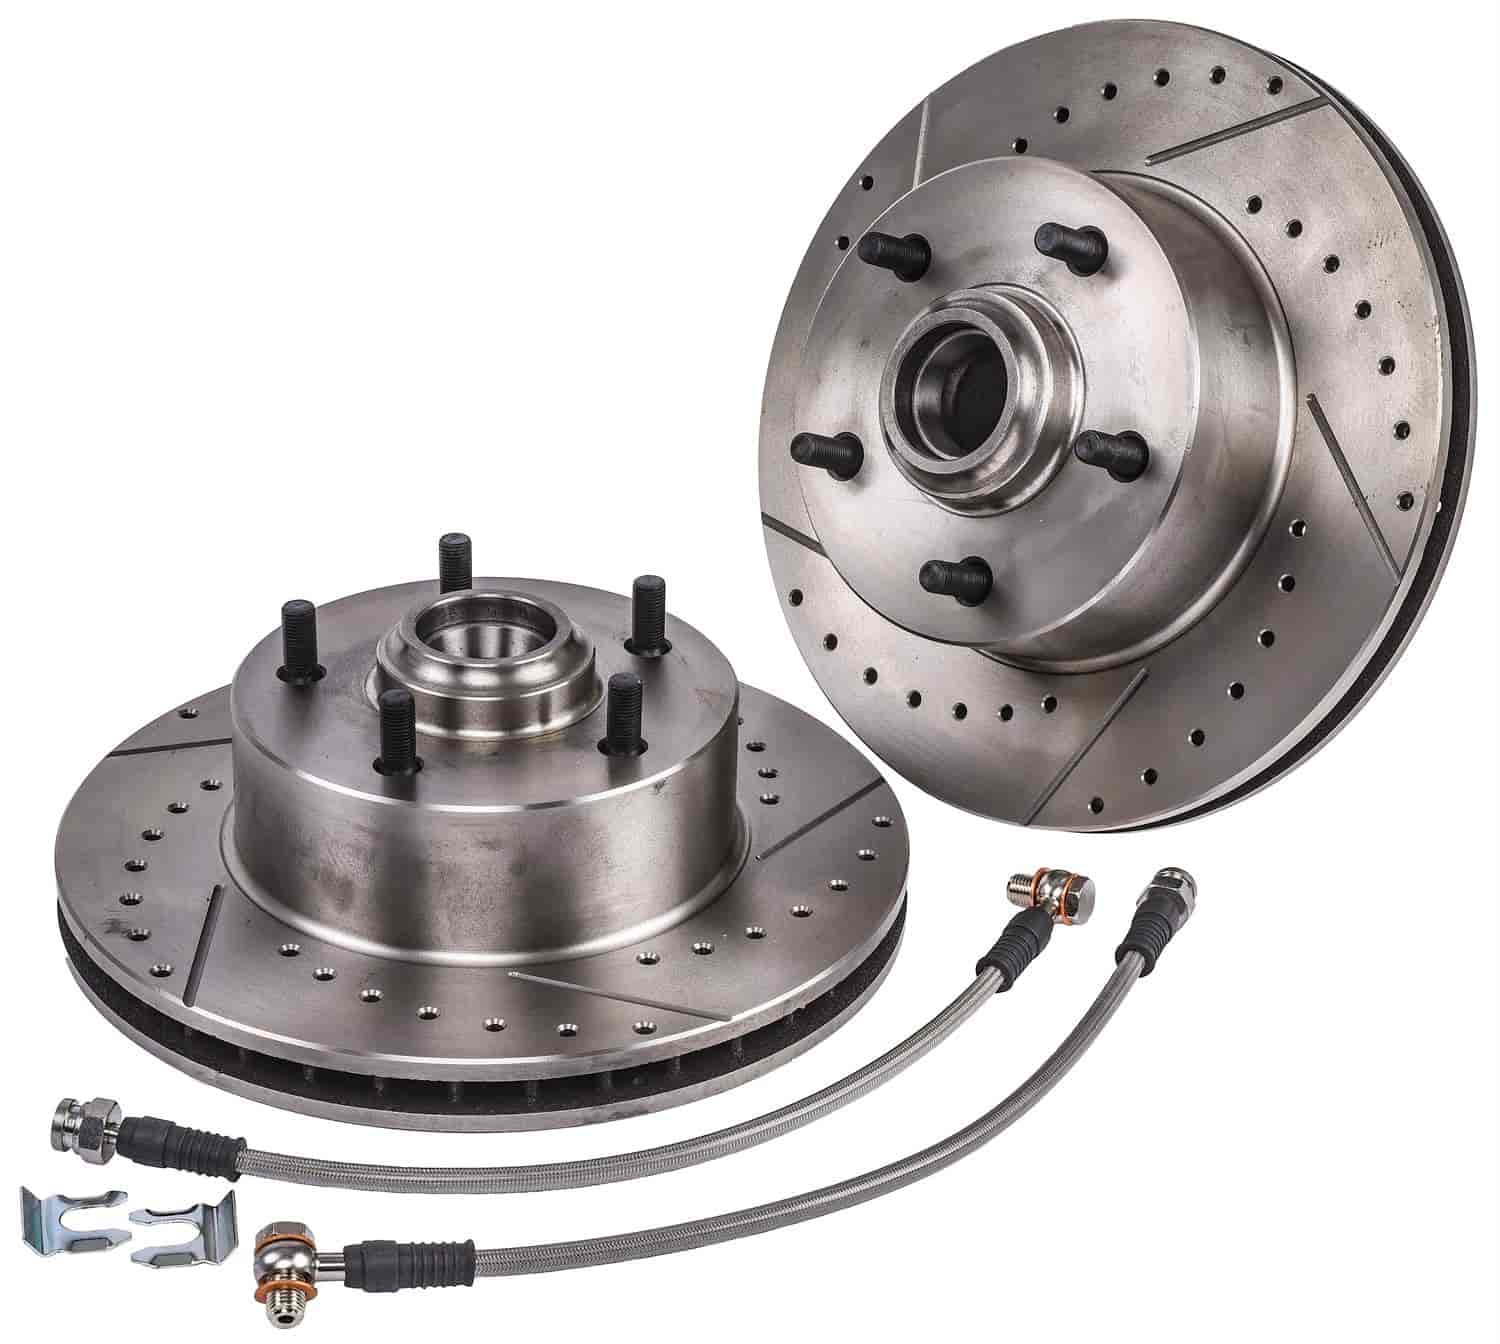 Replacement Rotors, and Brakes Lines Fits A, F, X Body and 1955-1958 Chevy with 2 in. Drop Height Disc Brake Conversion Kits